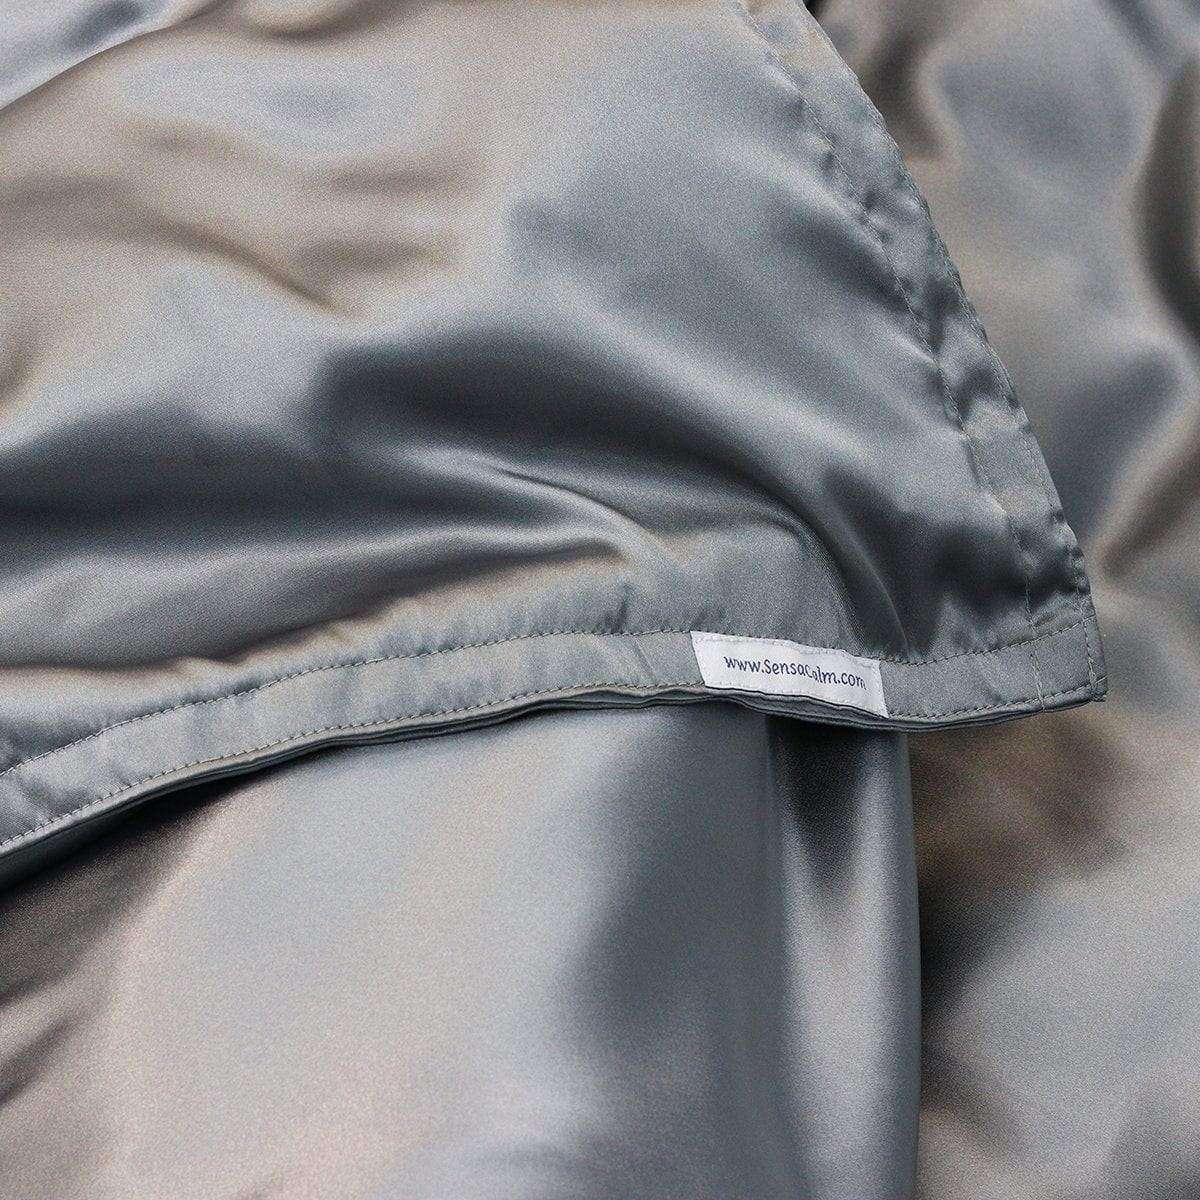 Cooling Silky Satin Duvet Cover - Solid Graphite